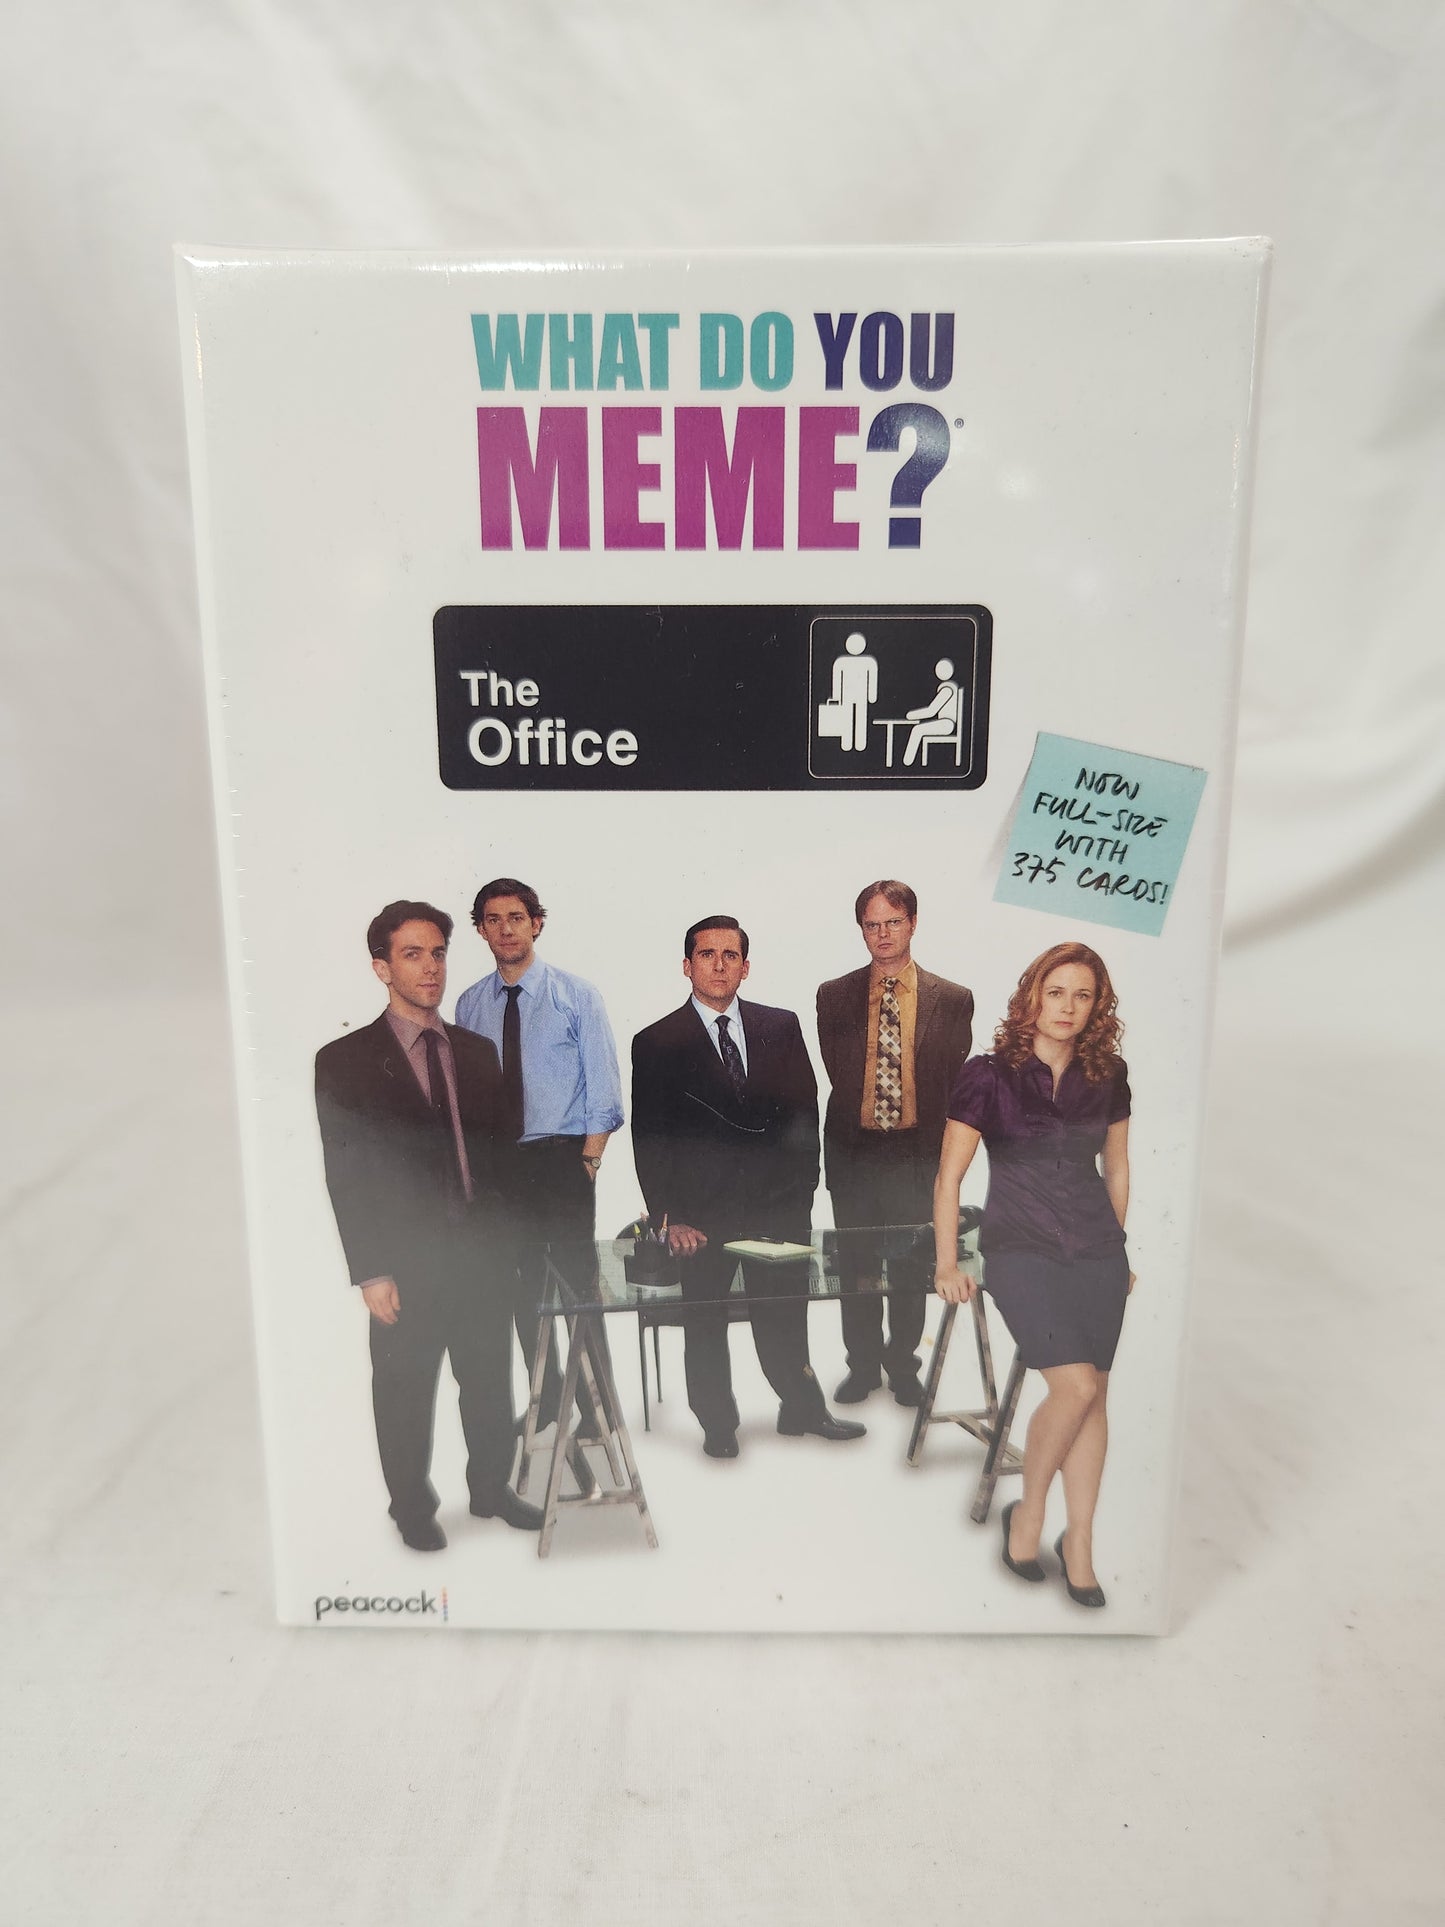 NIB - What Do You Meme? - The Office Edition w/ 375 Full Size Cards